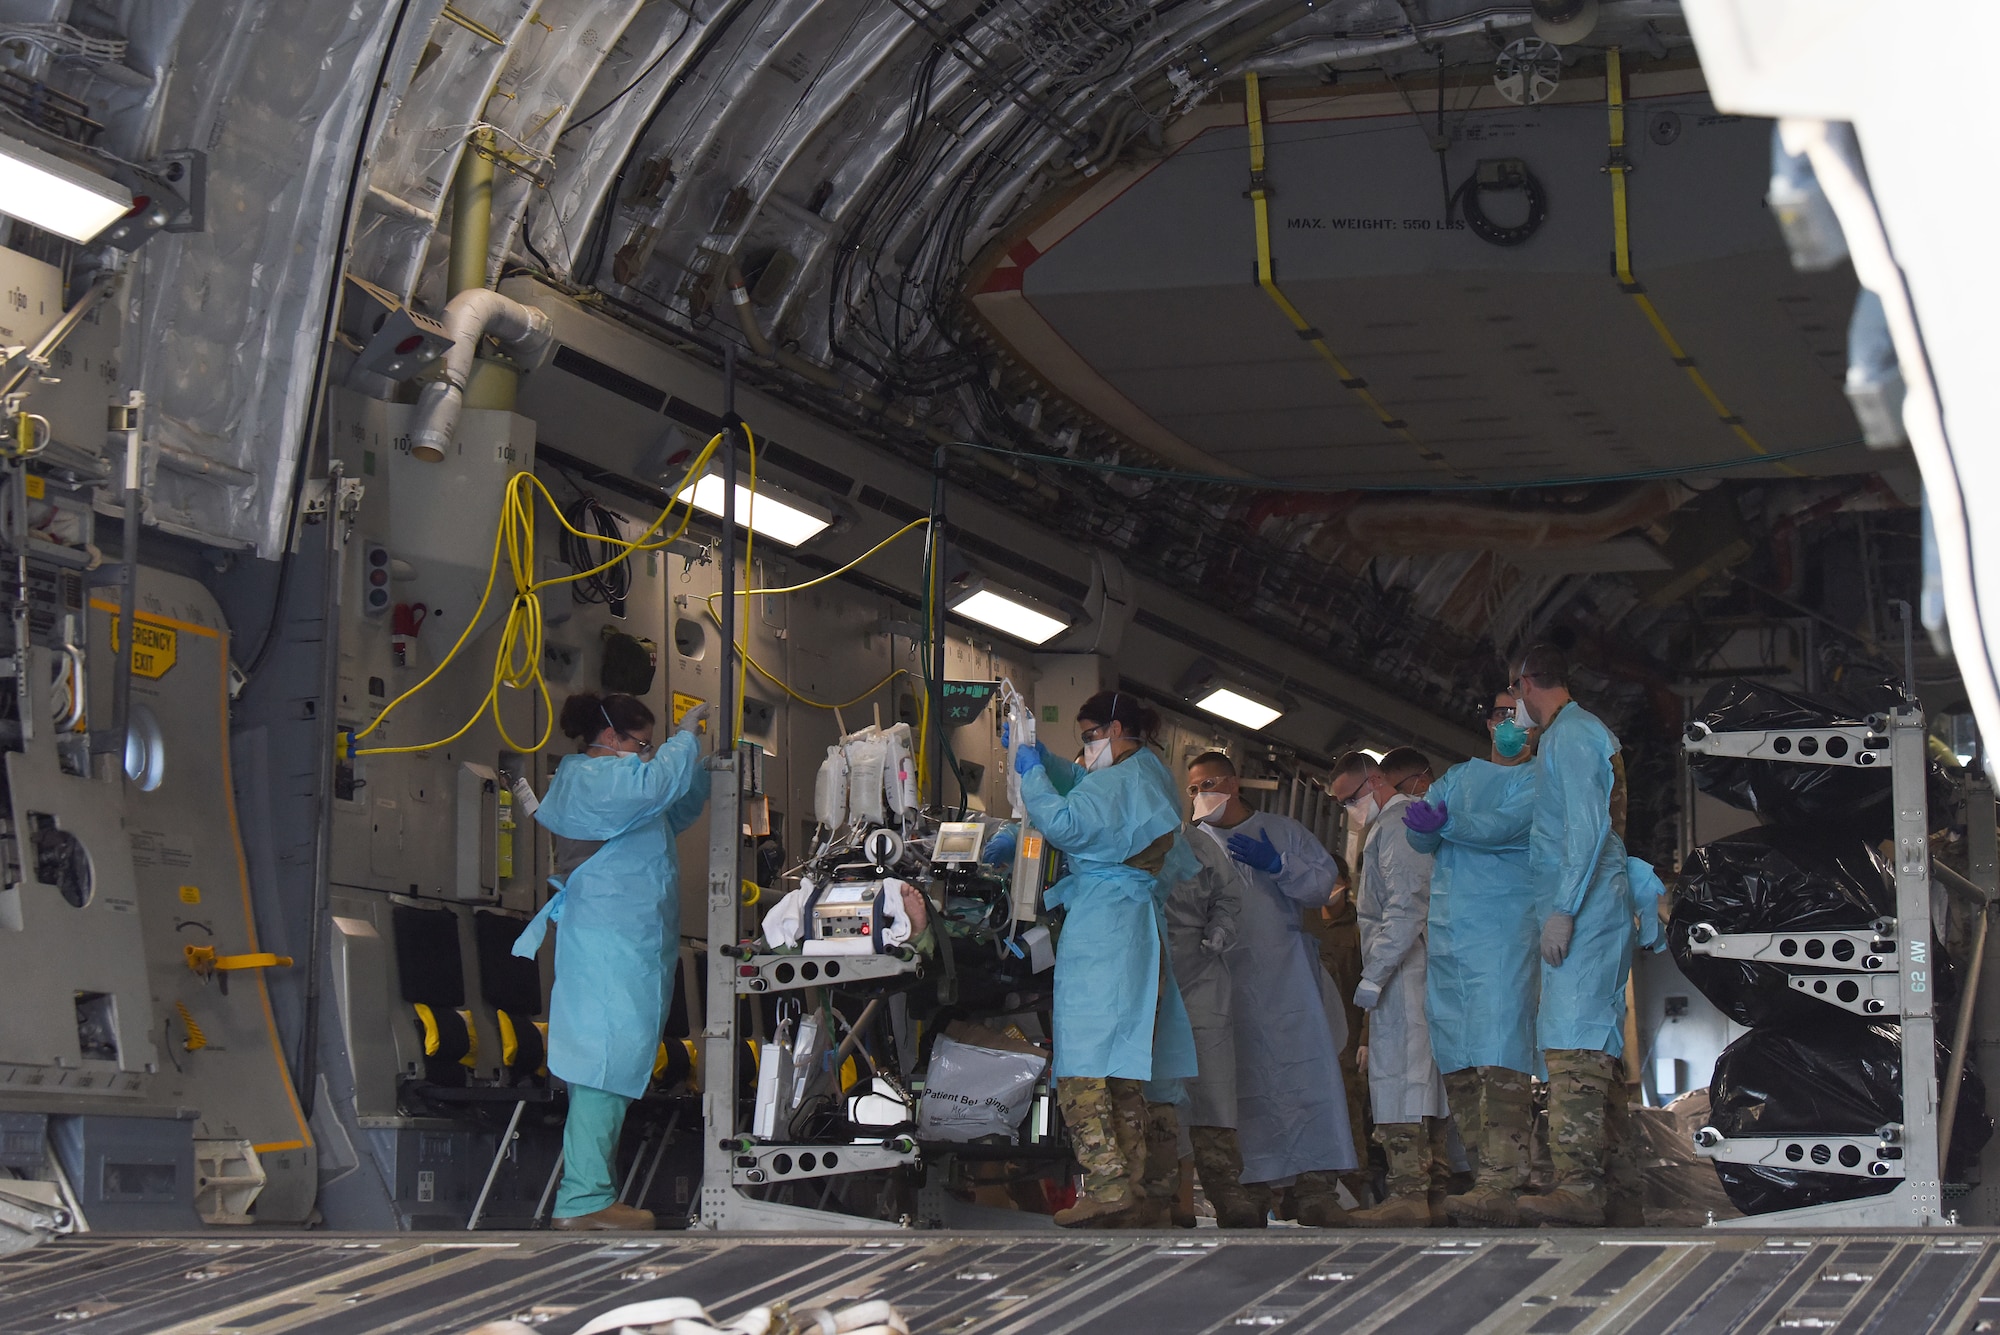 A COVID-19 patient who was being cared for at Madigan Army Medical Center, is loaded onto a C-17 Globemaster III by an aeromedical evacuation team from the 775th Expeditionary Aeromedical Evacuation flight from Travis Air Force Base, California, and other medical professionals from Madigan, at Joint Base Lewis-McChord, Washington, March 31, 2021. The patient was in severe respiratory distress and was hooked up to an extracorporeal membrane oxygenation (EMCO) system, which aids the body in breathing. (U.S. Air Force photo by Senior Airman Mikayla Heineck)